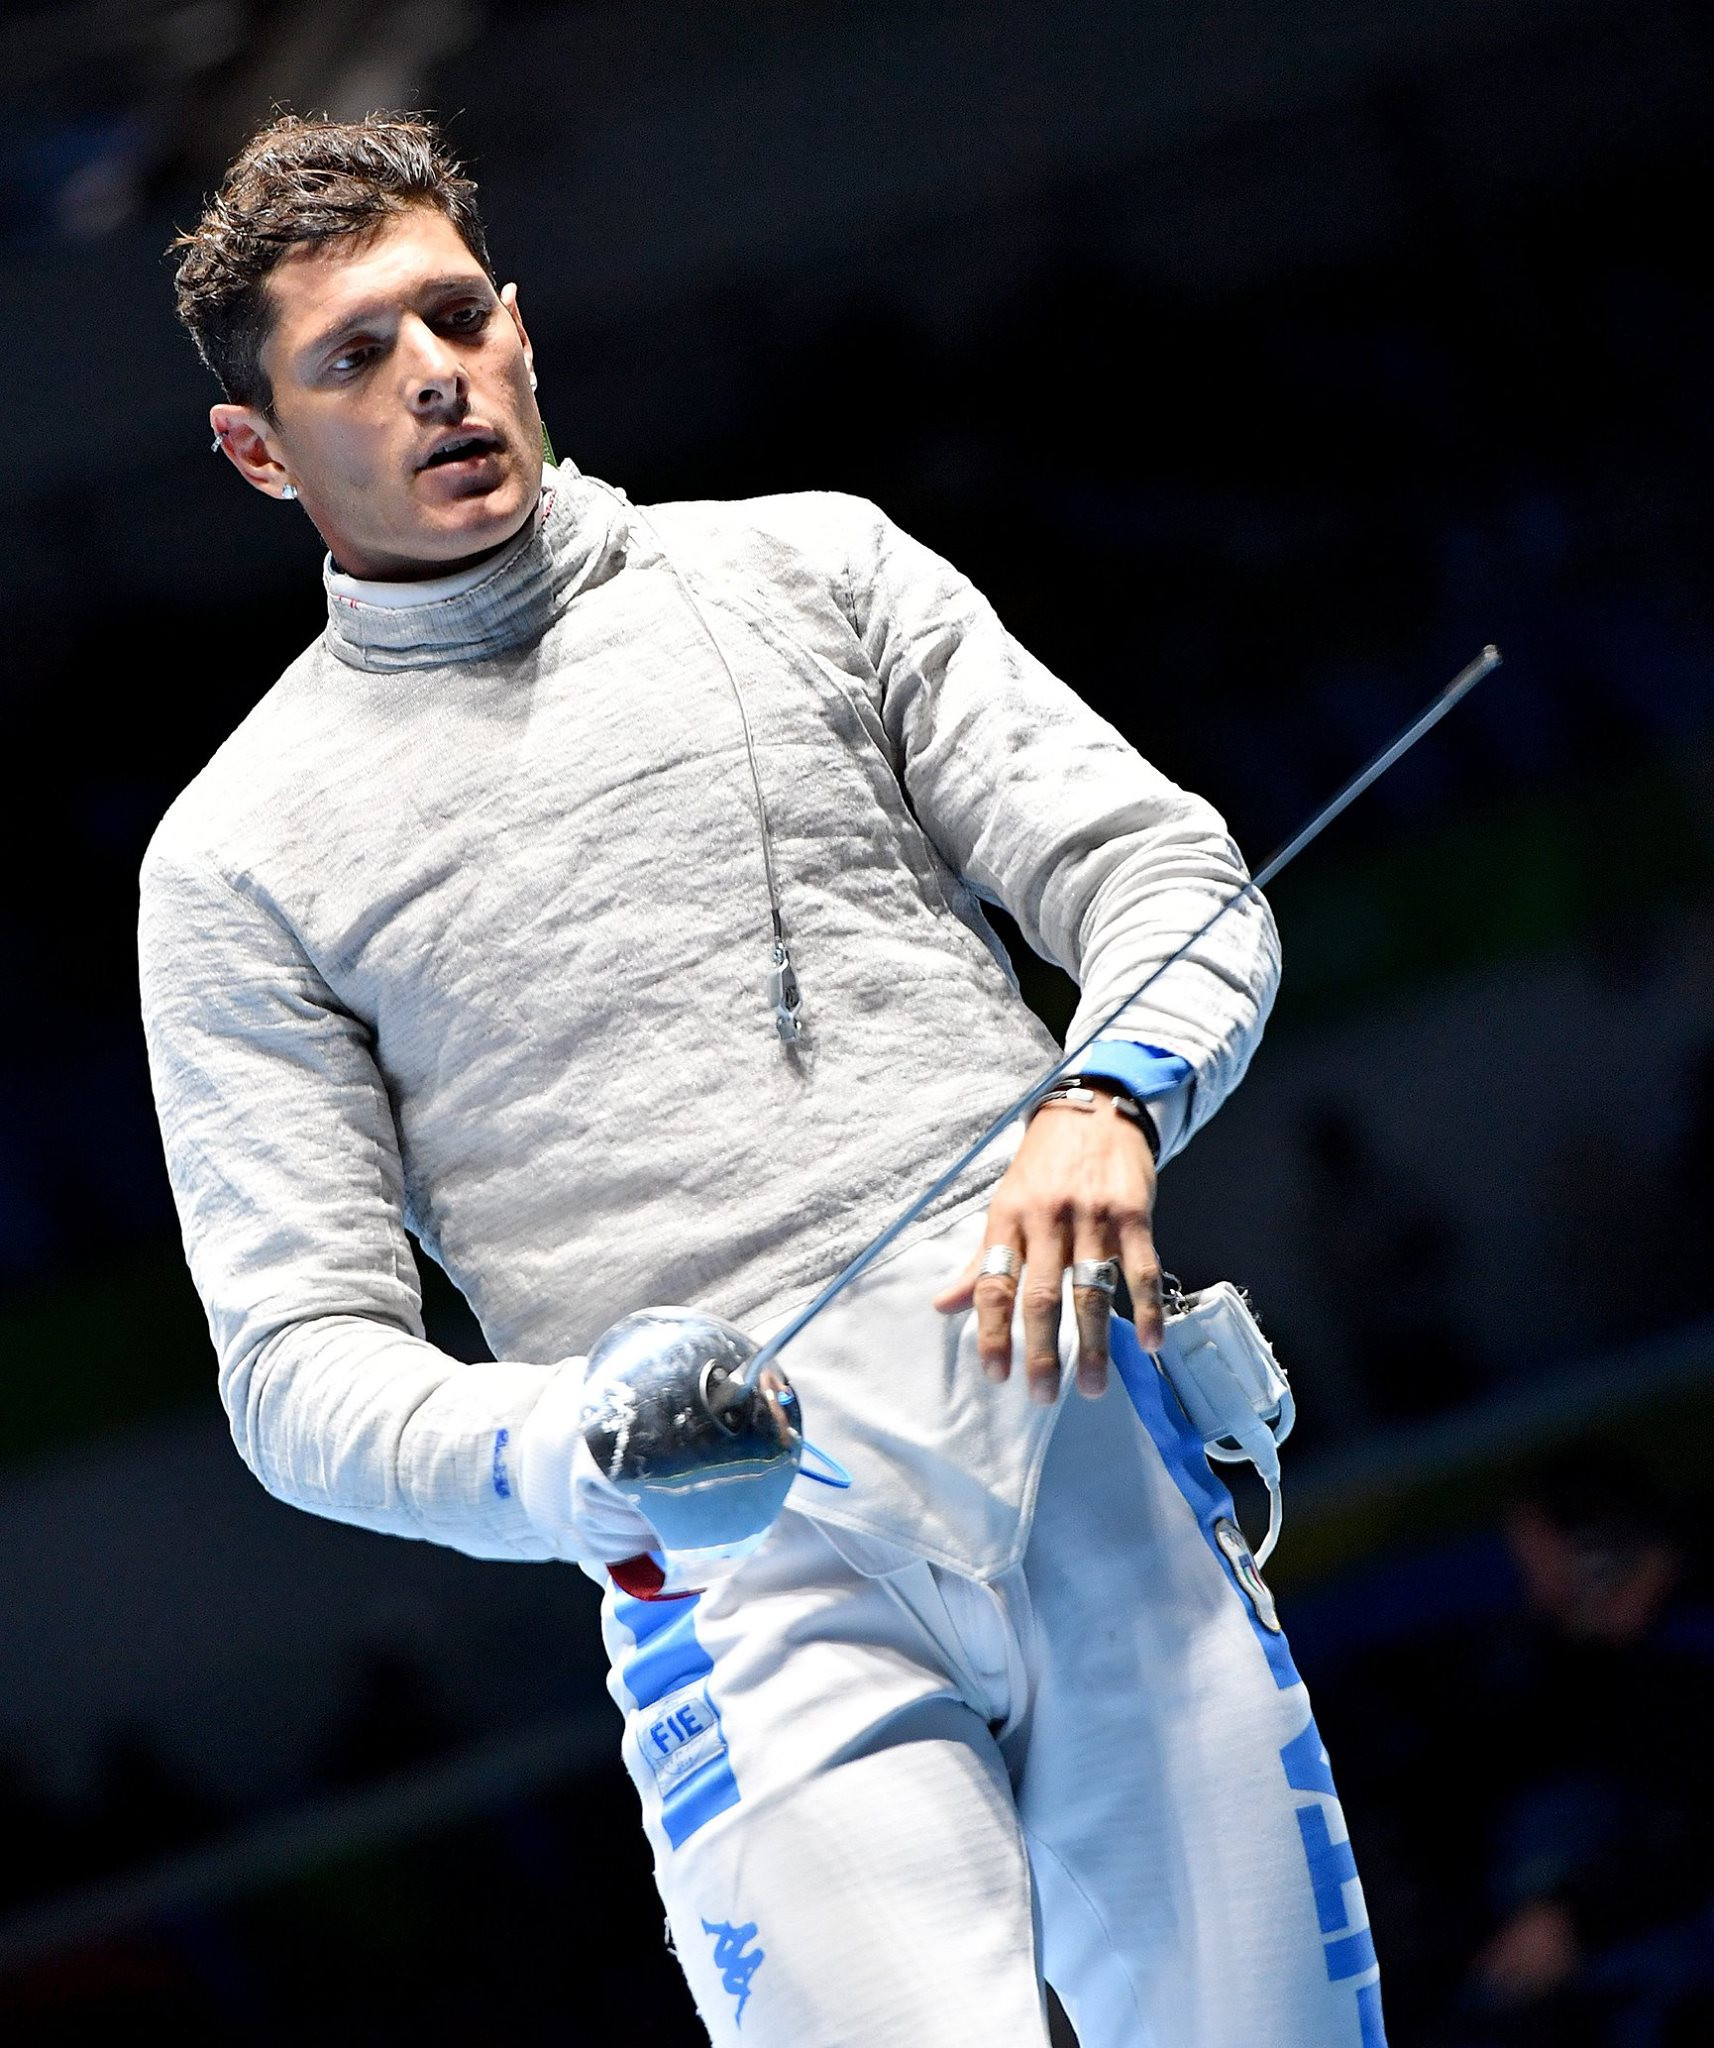 Montano elected President of International Fencing Federation Athletes' Commission